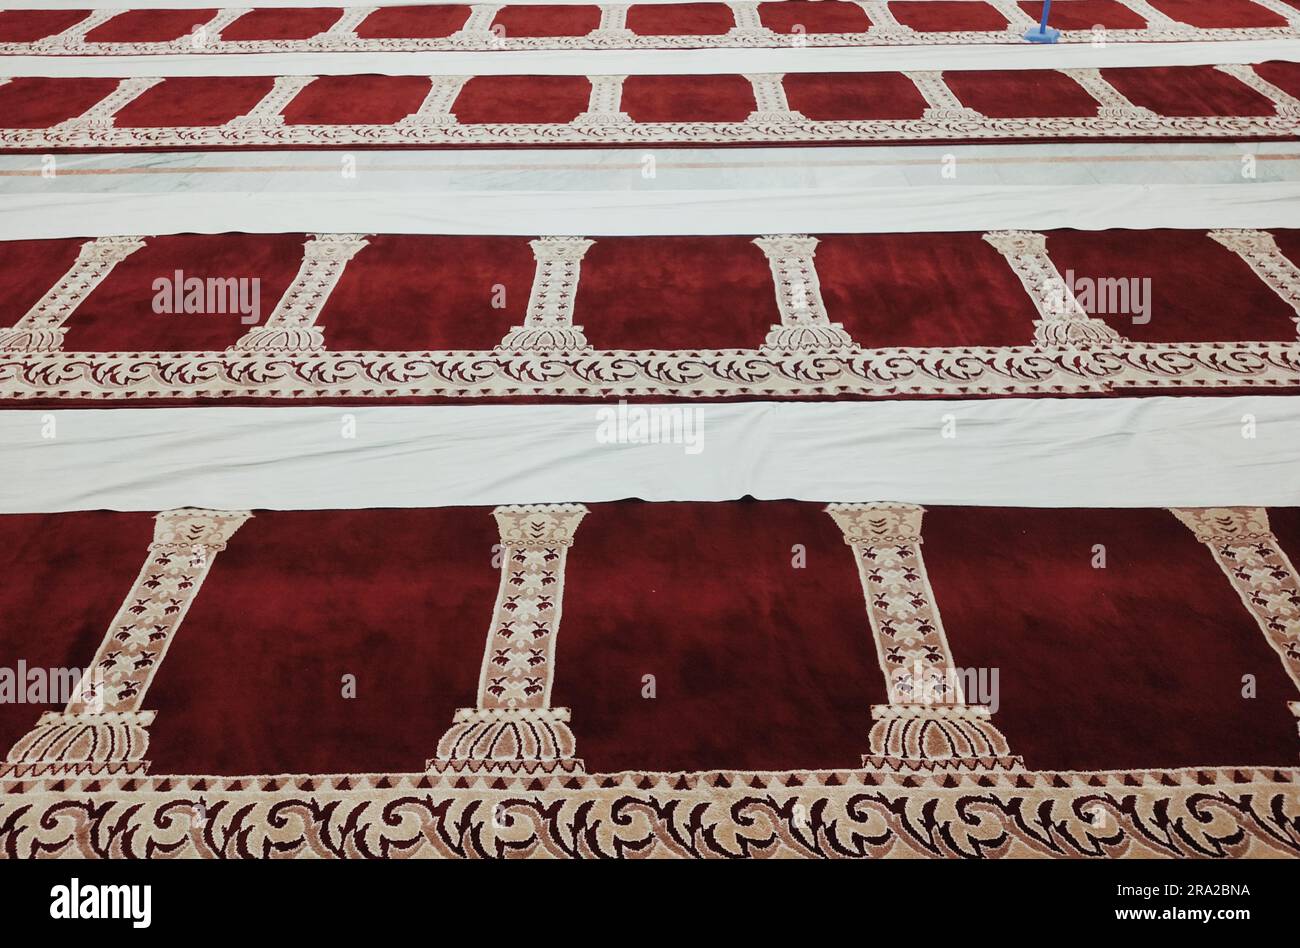 This stock photo features an image of a traditional Islamic mosque carpet with intricate geometric patterns Stock Photo